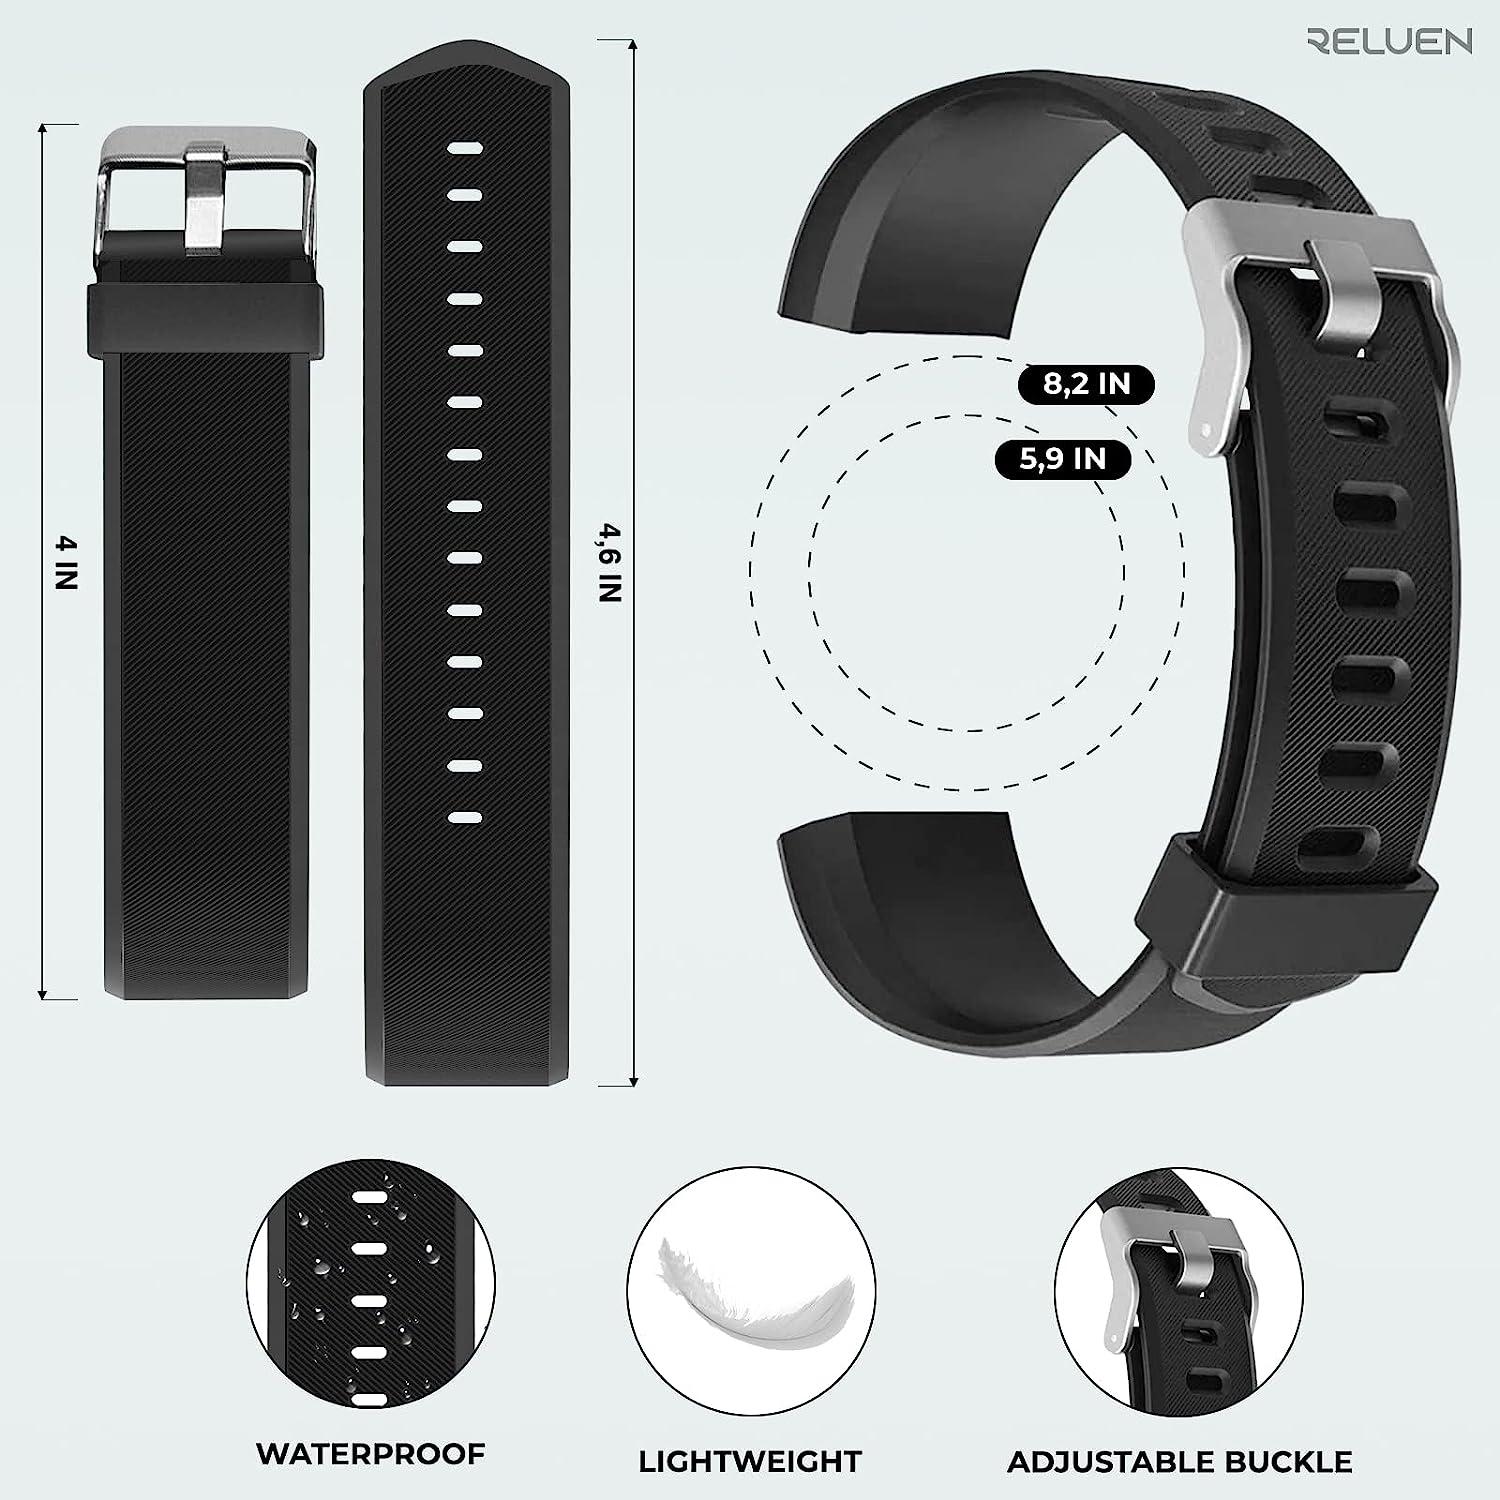 Smart Fitness Tracker Ion Bracelet With Step Counter, Activity Monitor,  Alarm Clock, And Vibration For IOS And Android From Cool_product, $11.66 |  DHgate.Com